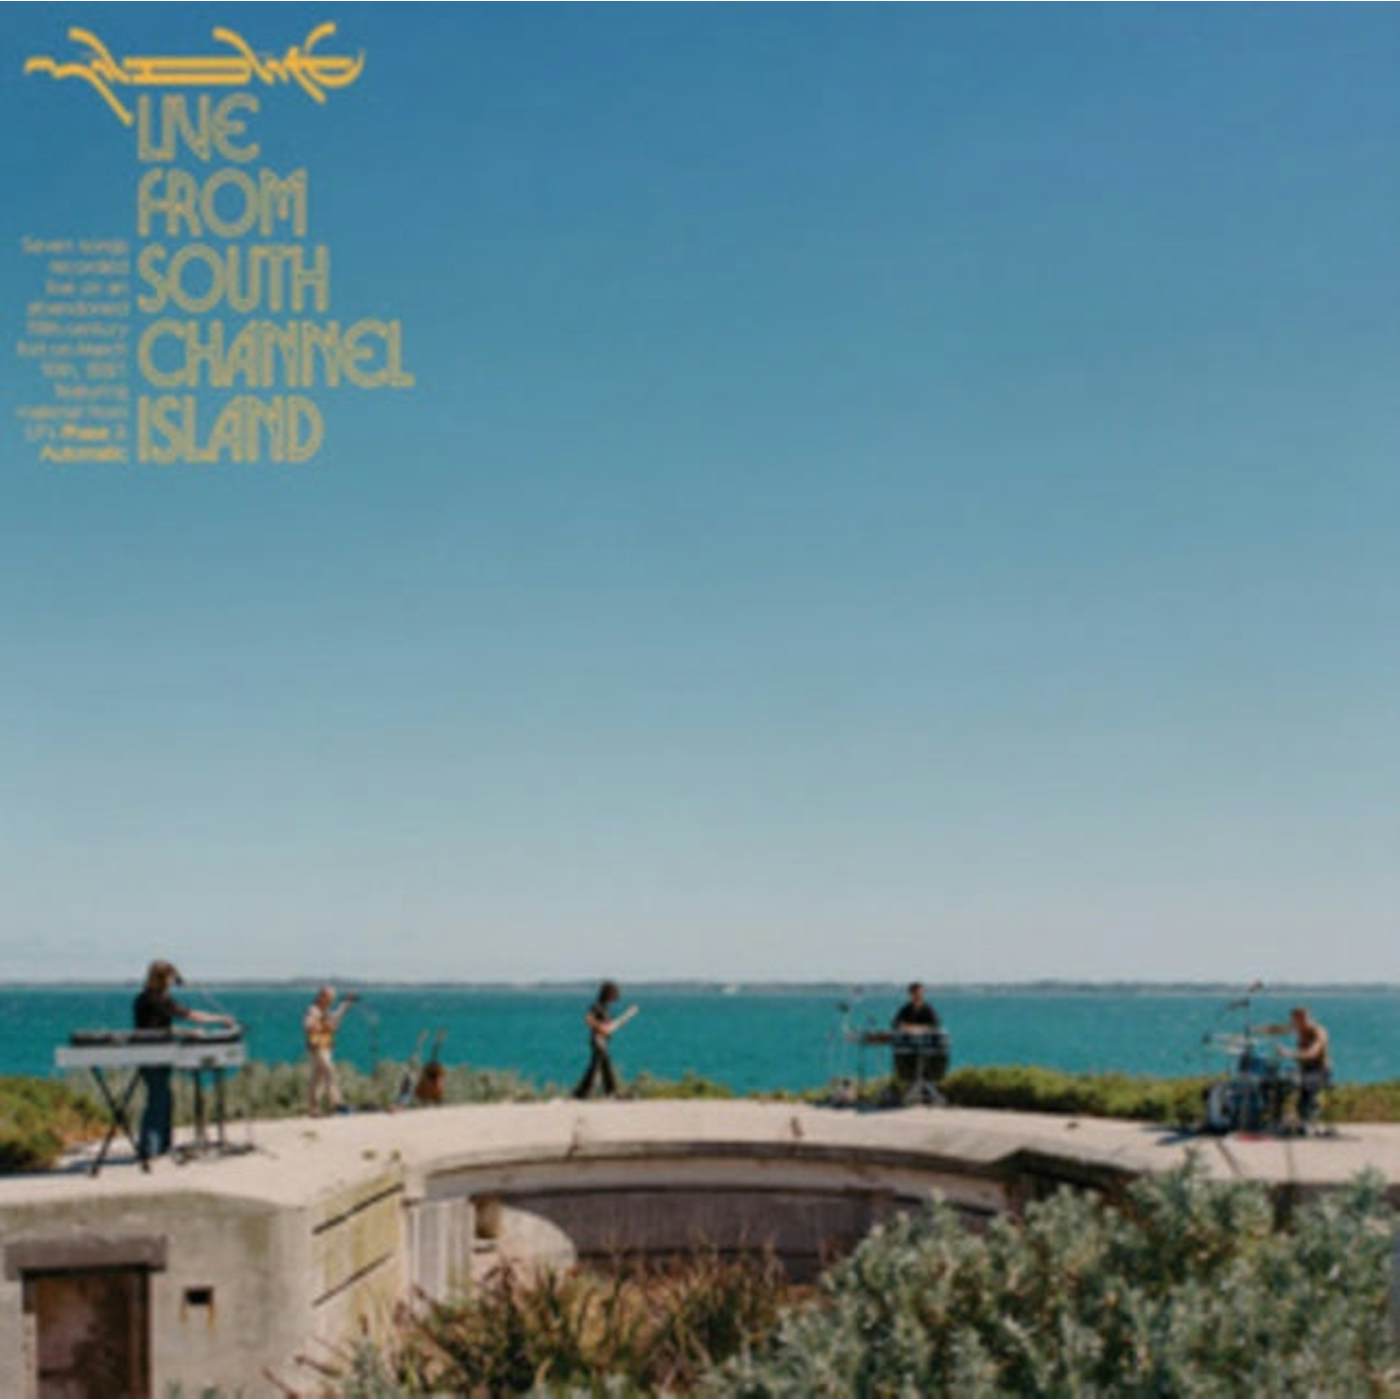 Mildlife LP Vinyl Record - Live From South Channel Island